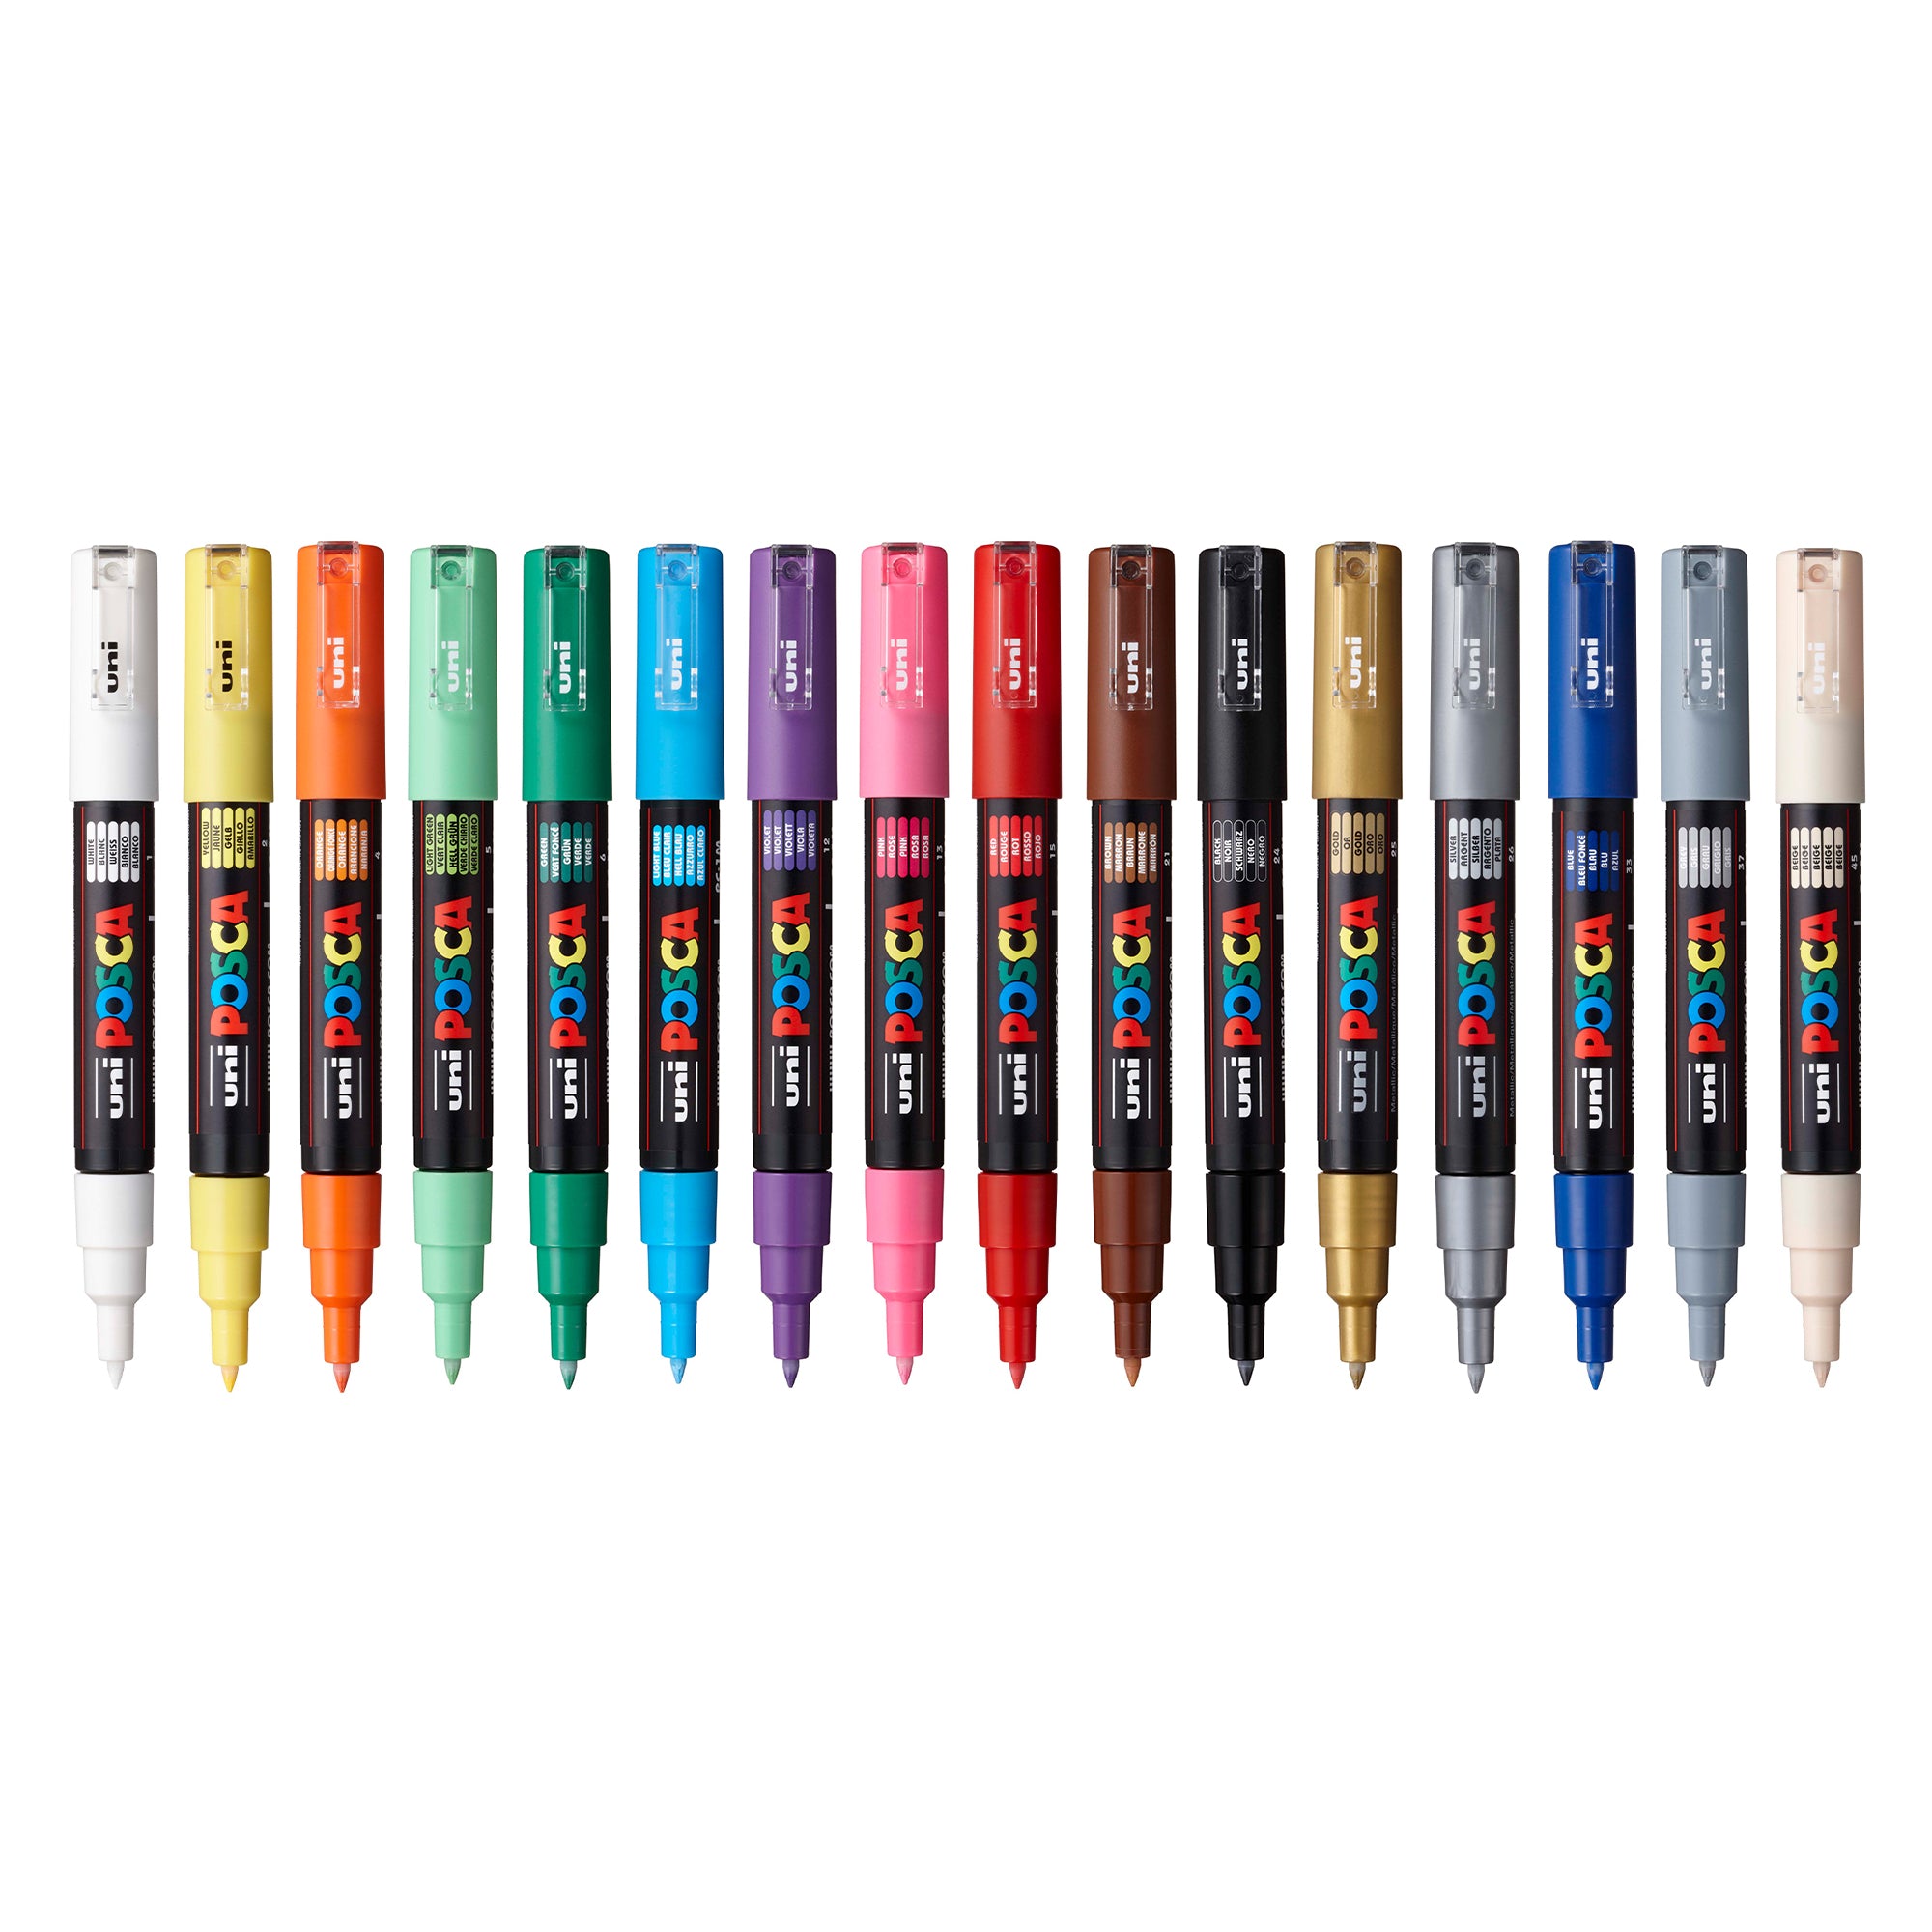 uni® POSCA® PC-1M, Water-Based Paint Markers, (16 Pack)